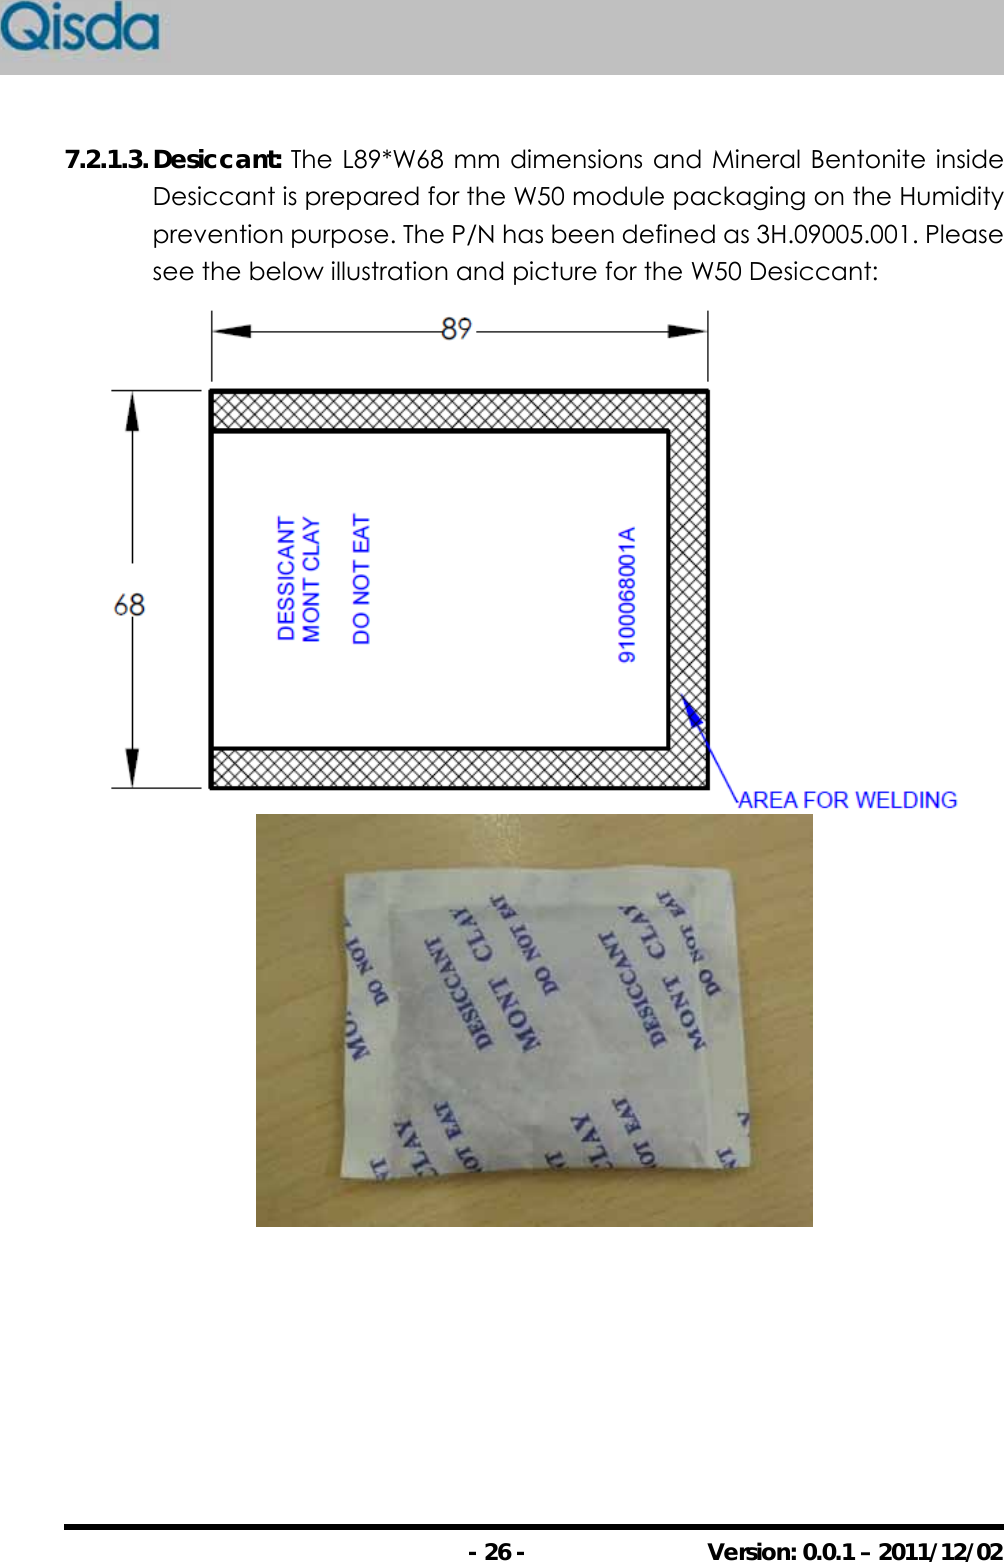                                                - 26 -  Version: 0.0.1 – 2011/12/02 7.2.1.3. Desiccant:  The L89*W68 mm dimensions and Mineral Bentonite inside Desiccant is prepared for the W50 module packaging on the Humidity prevention purpose. The P/N has been defined as 3H.09005.001. Please see the below illustration and picture for the W50 Desiccant:   